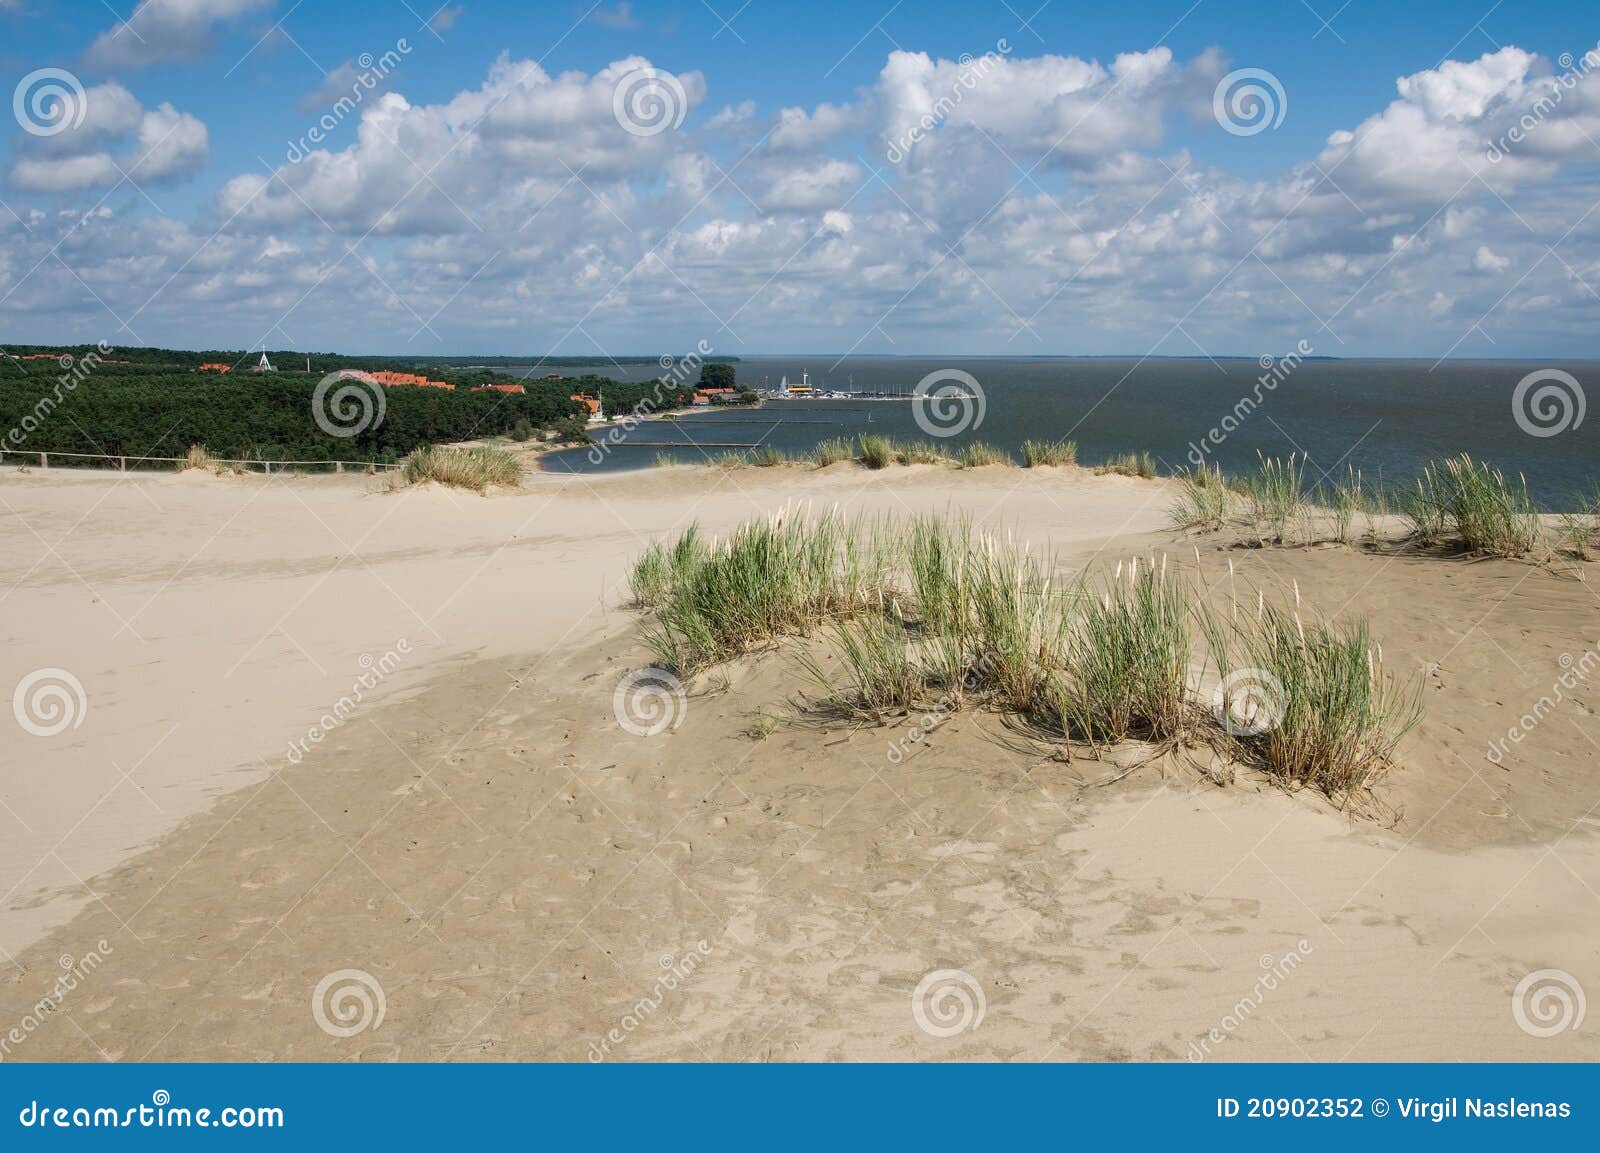 curonian spit panorama